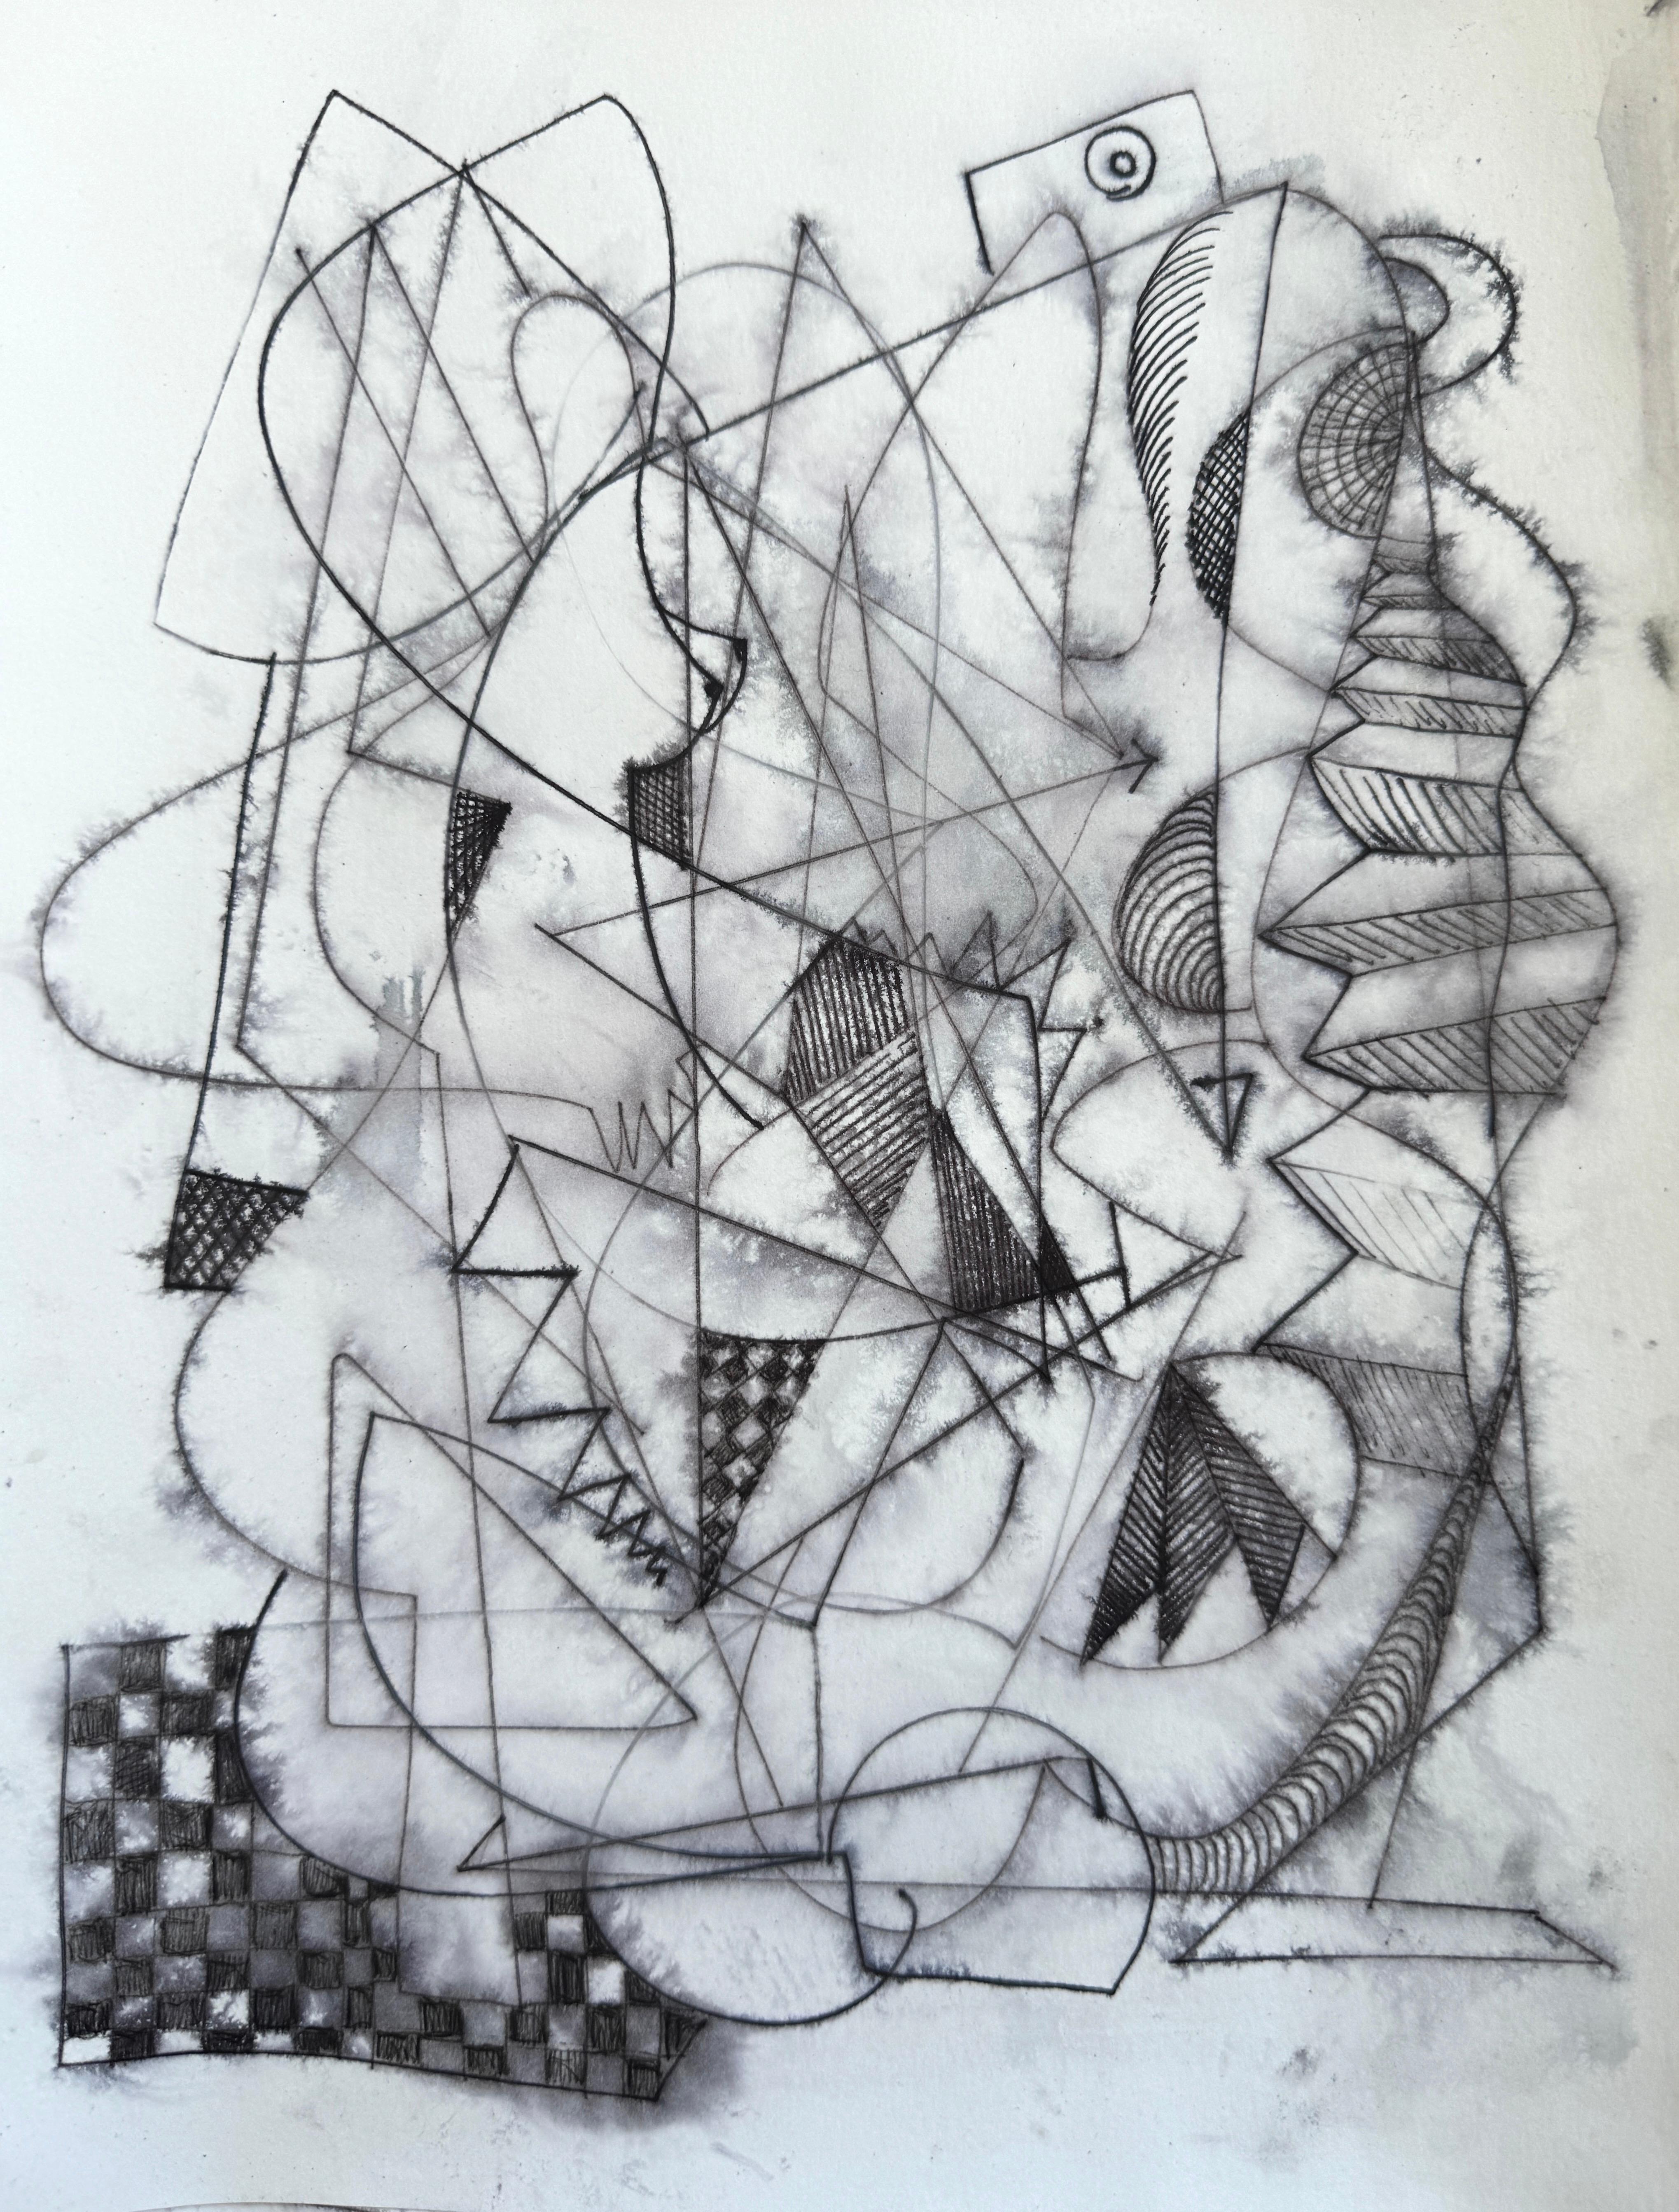 Concert, Figurative Original Painting, Ink on Paper, Black and White 